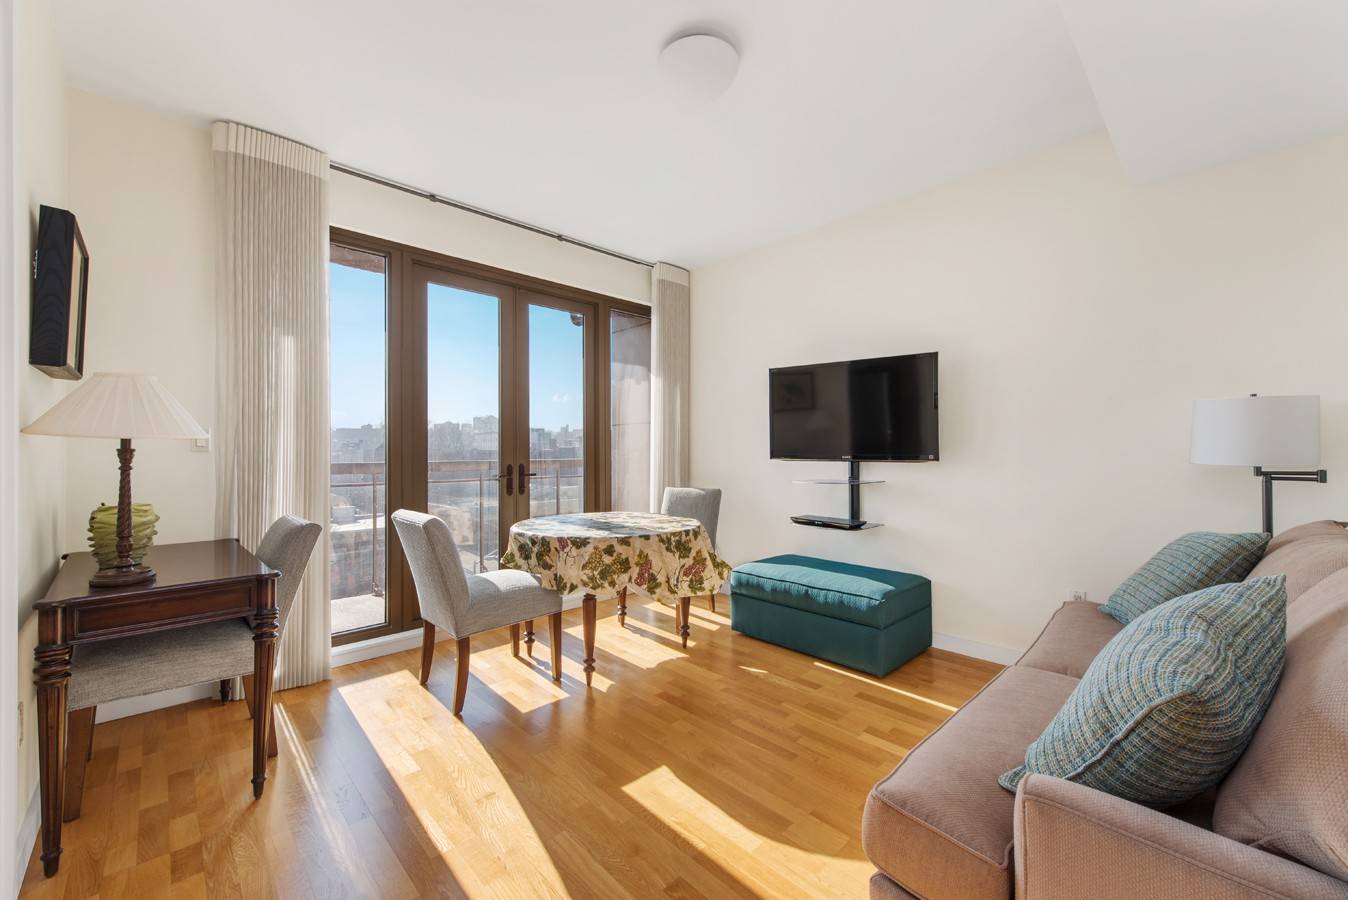 Style amp ; Conveniences on Fourth AveThis lovely one bedroom apartment is available for rent for the first time at the coveted 500 Fourth Avenue condominium in Park Slope.